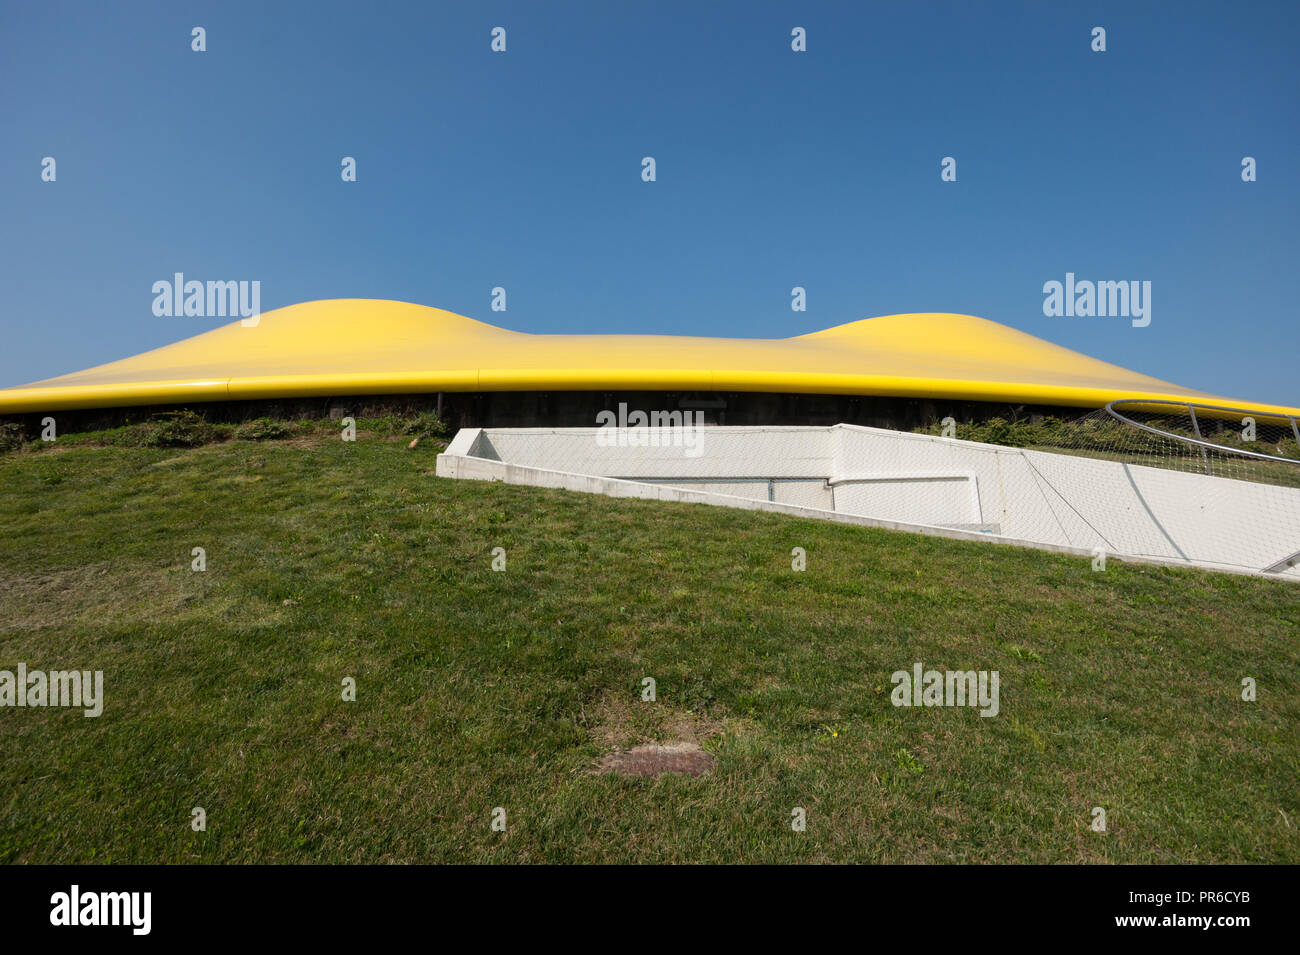 The Museo Enzo Ferrari automobile museum, Modena, Italy, official museum of Ferrari; building (2012) designed by British architects Future Systems Stock Photo